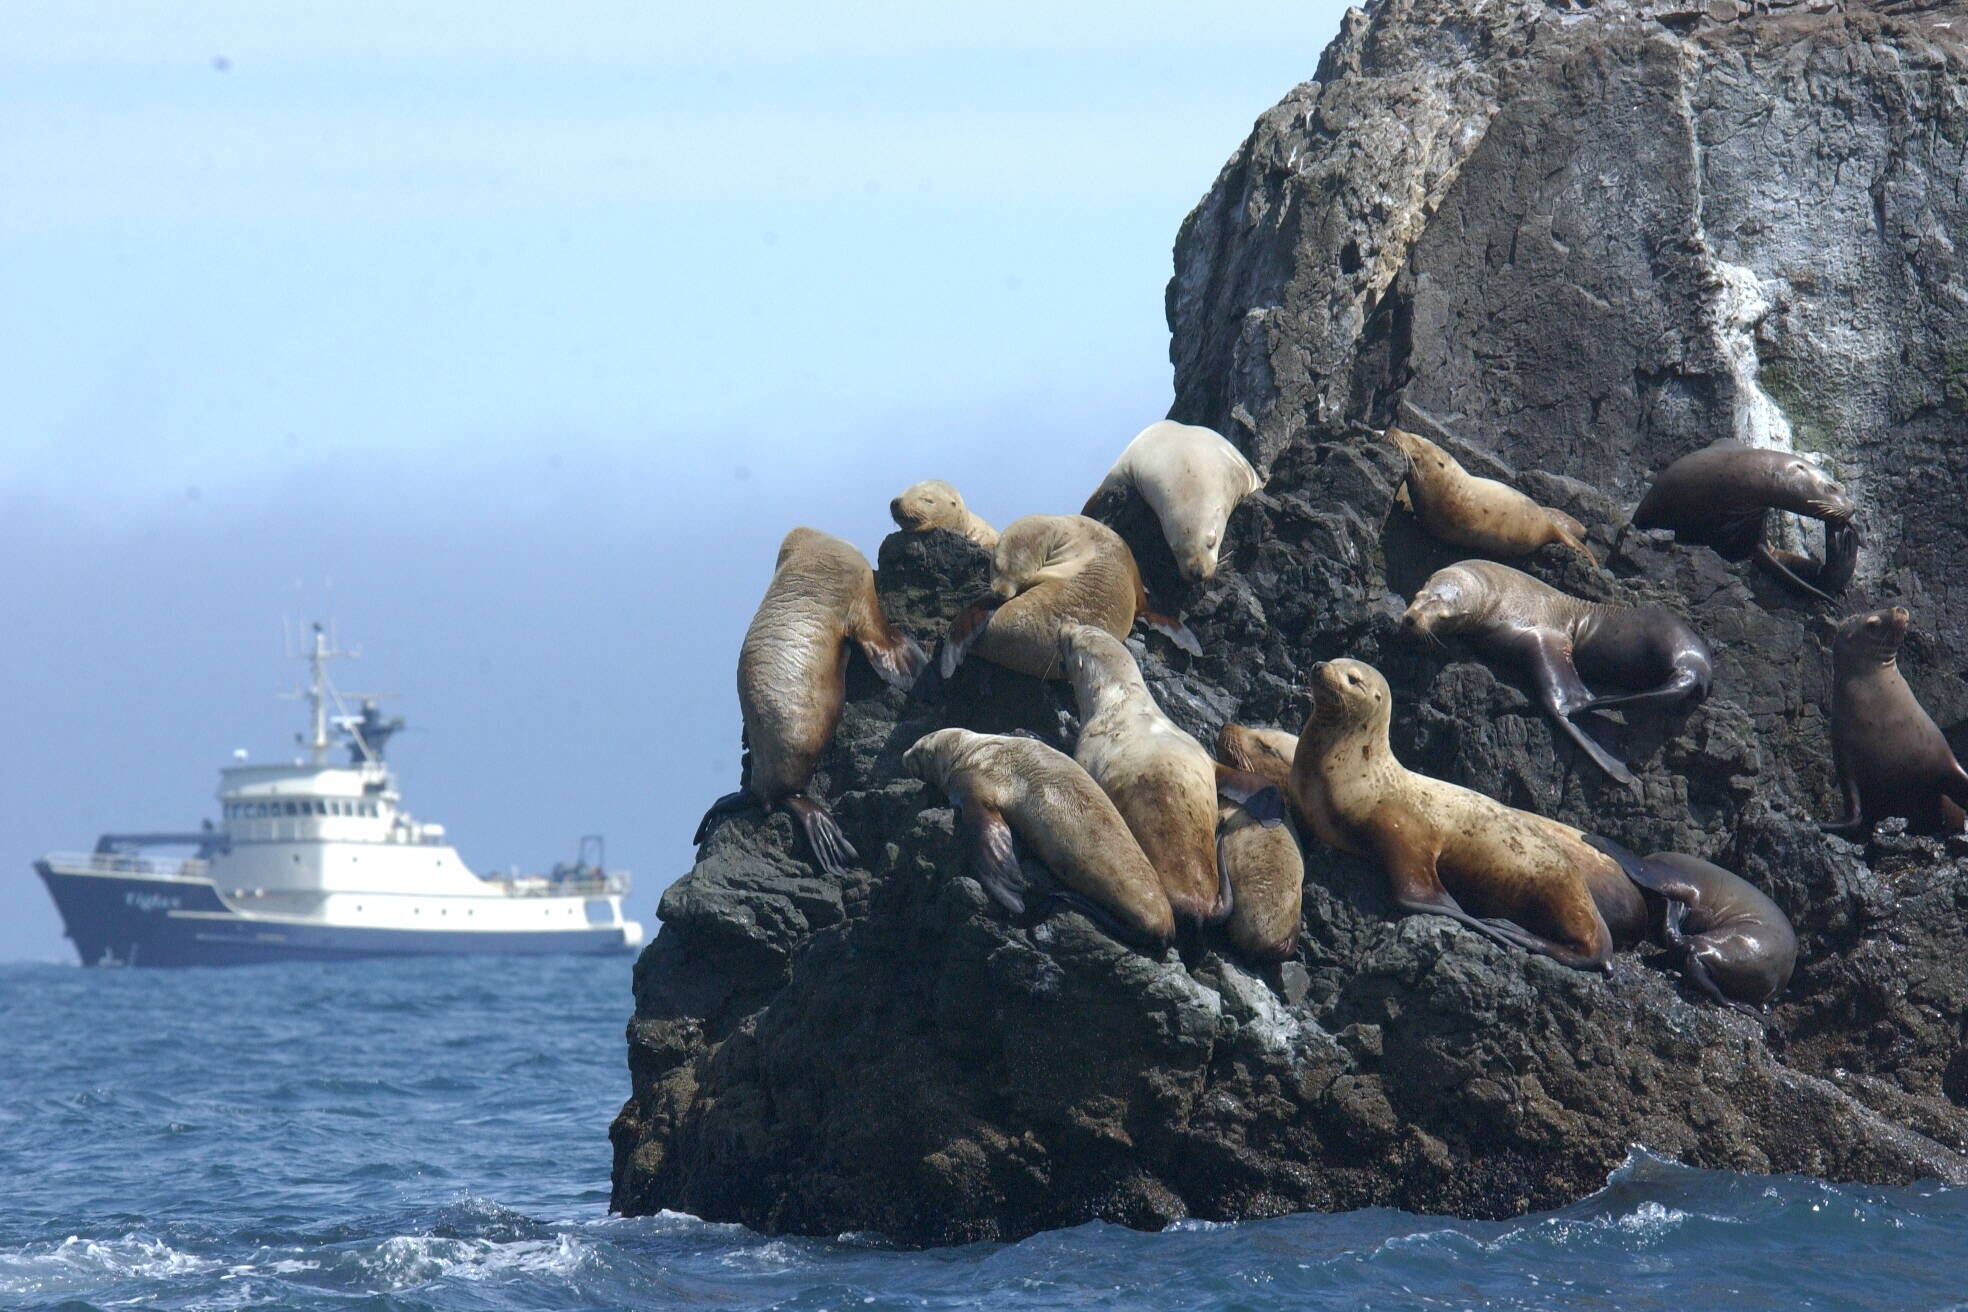 Steller sea lions bask on rocks in the Gulf of Alaska on June 29, 2003, with the research vessel Tiglax sailing in the background. Of all NOAA-managed Alaska marine mammals, Steller sea lions were the most frequent victims of human-caused deaths and serious injuries, according to a newly released five-year report. (Photo provided by U.S. Fish and Wildlife Service)